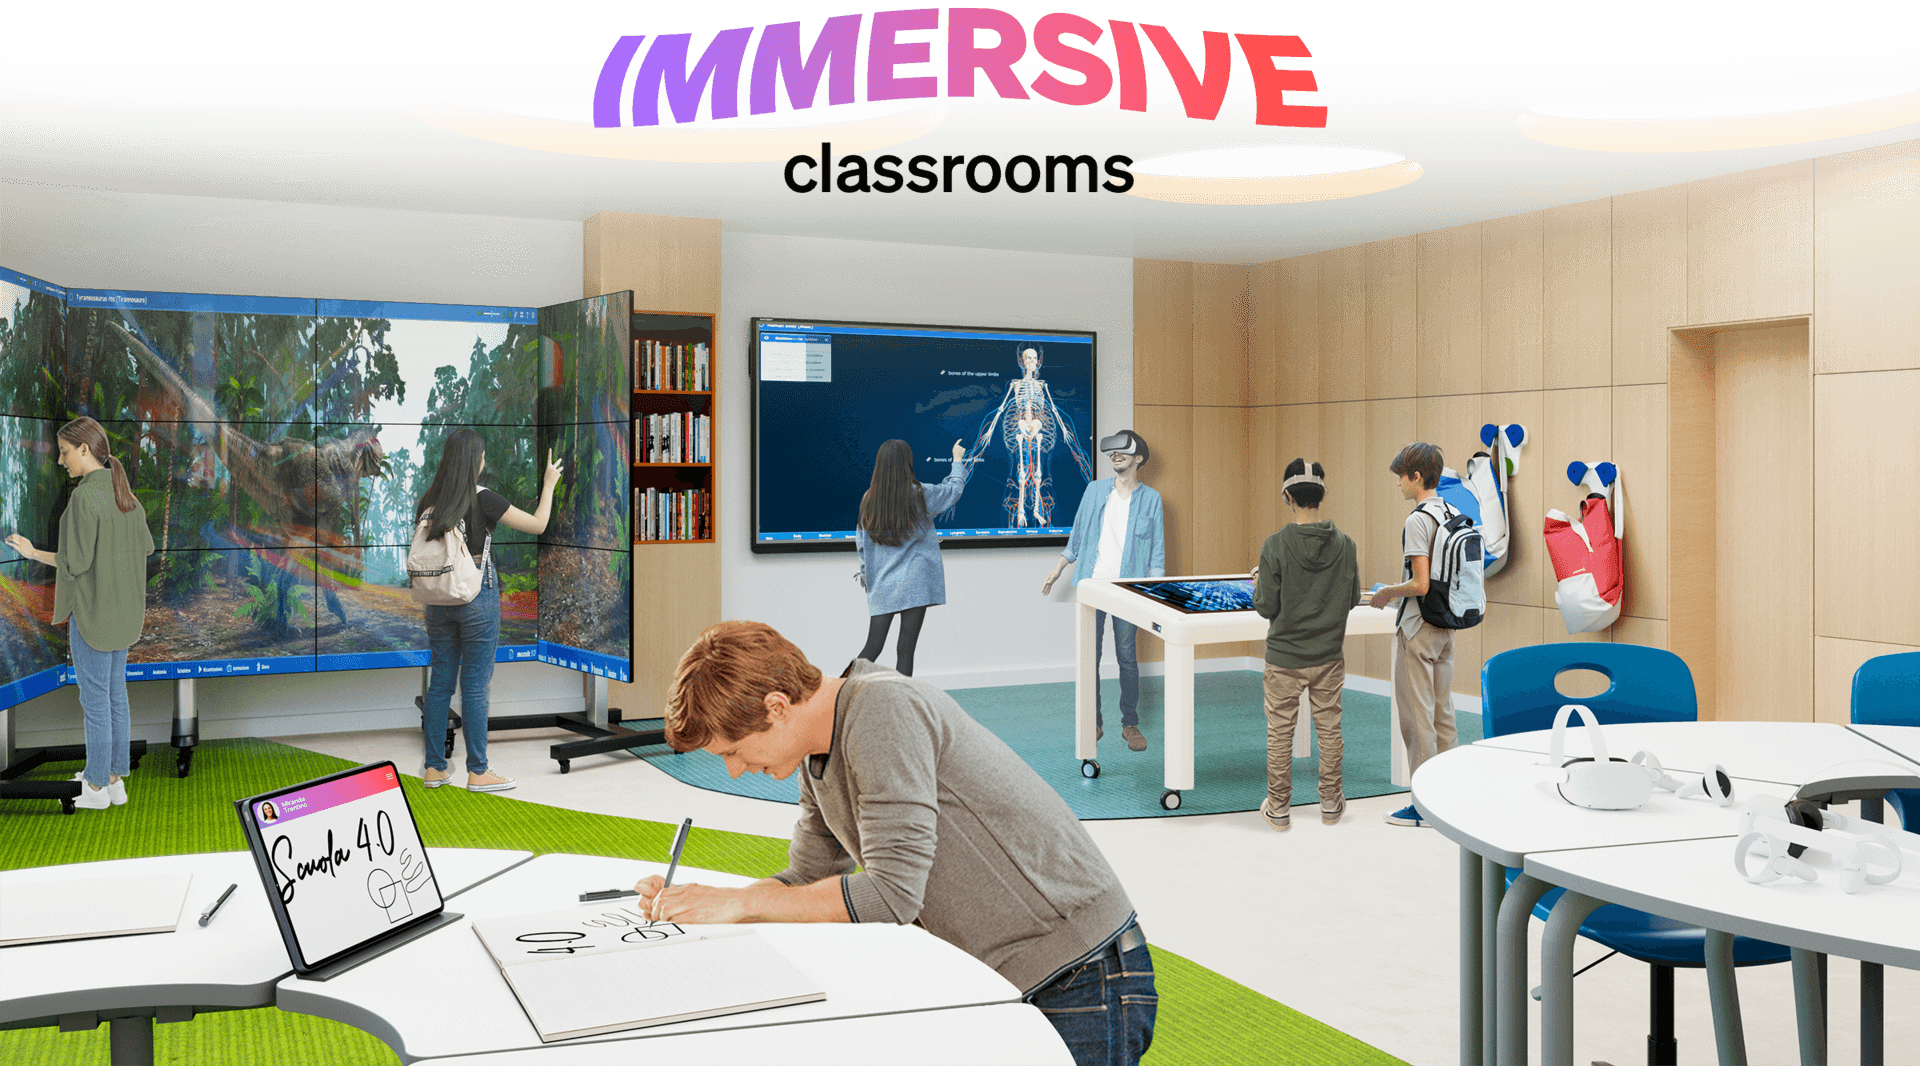 The school of the future is digital, interactive & immersive!